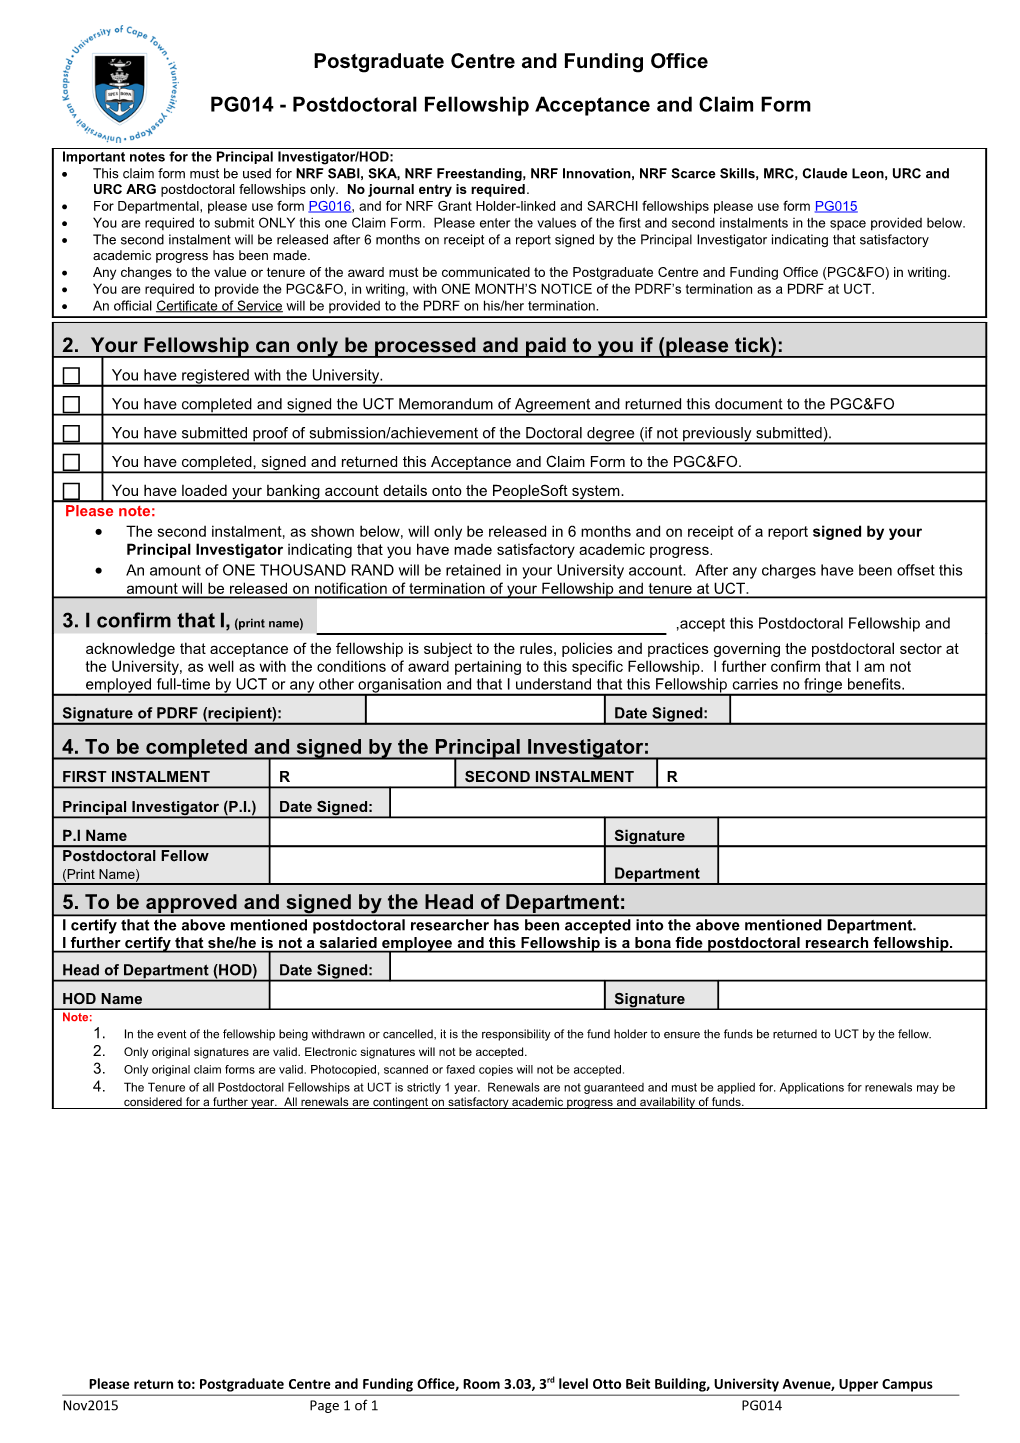 PG014 - Postdoctoral Fellowship Acceptance and Claim Form